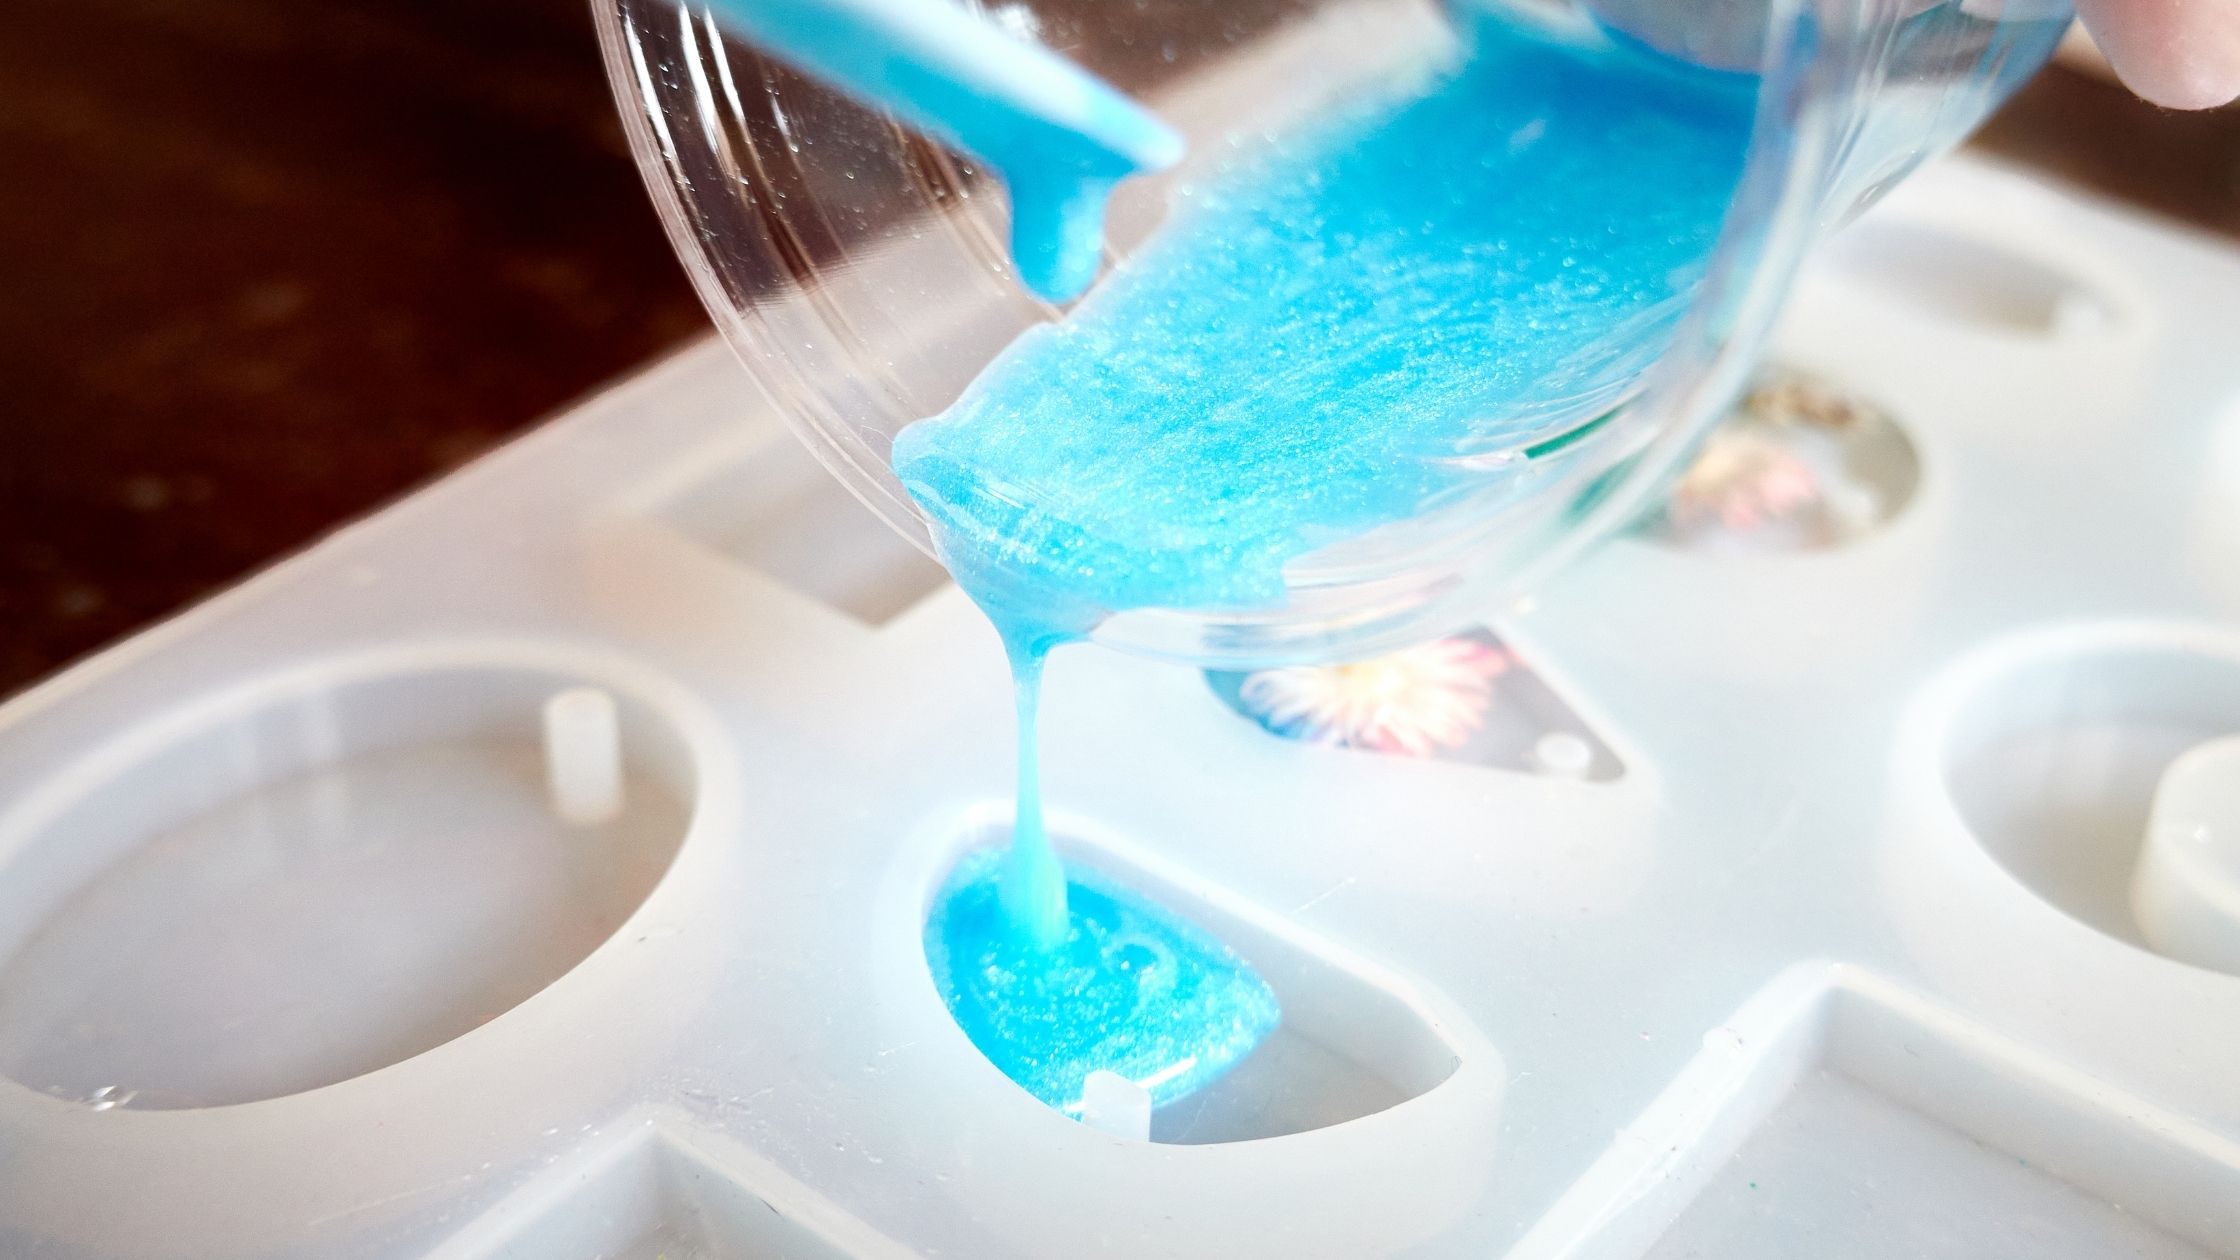 blue colored epoxy resin being poured into a mould